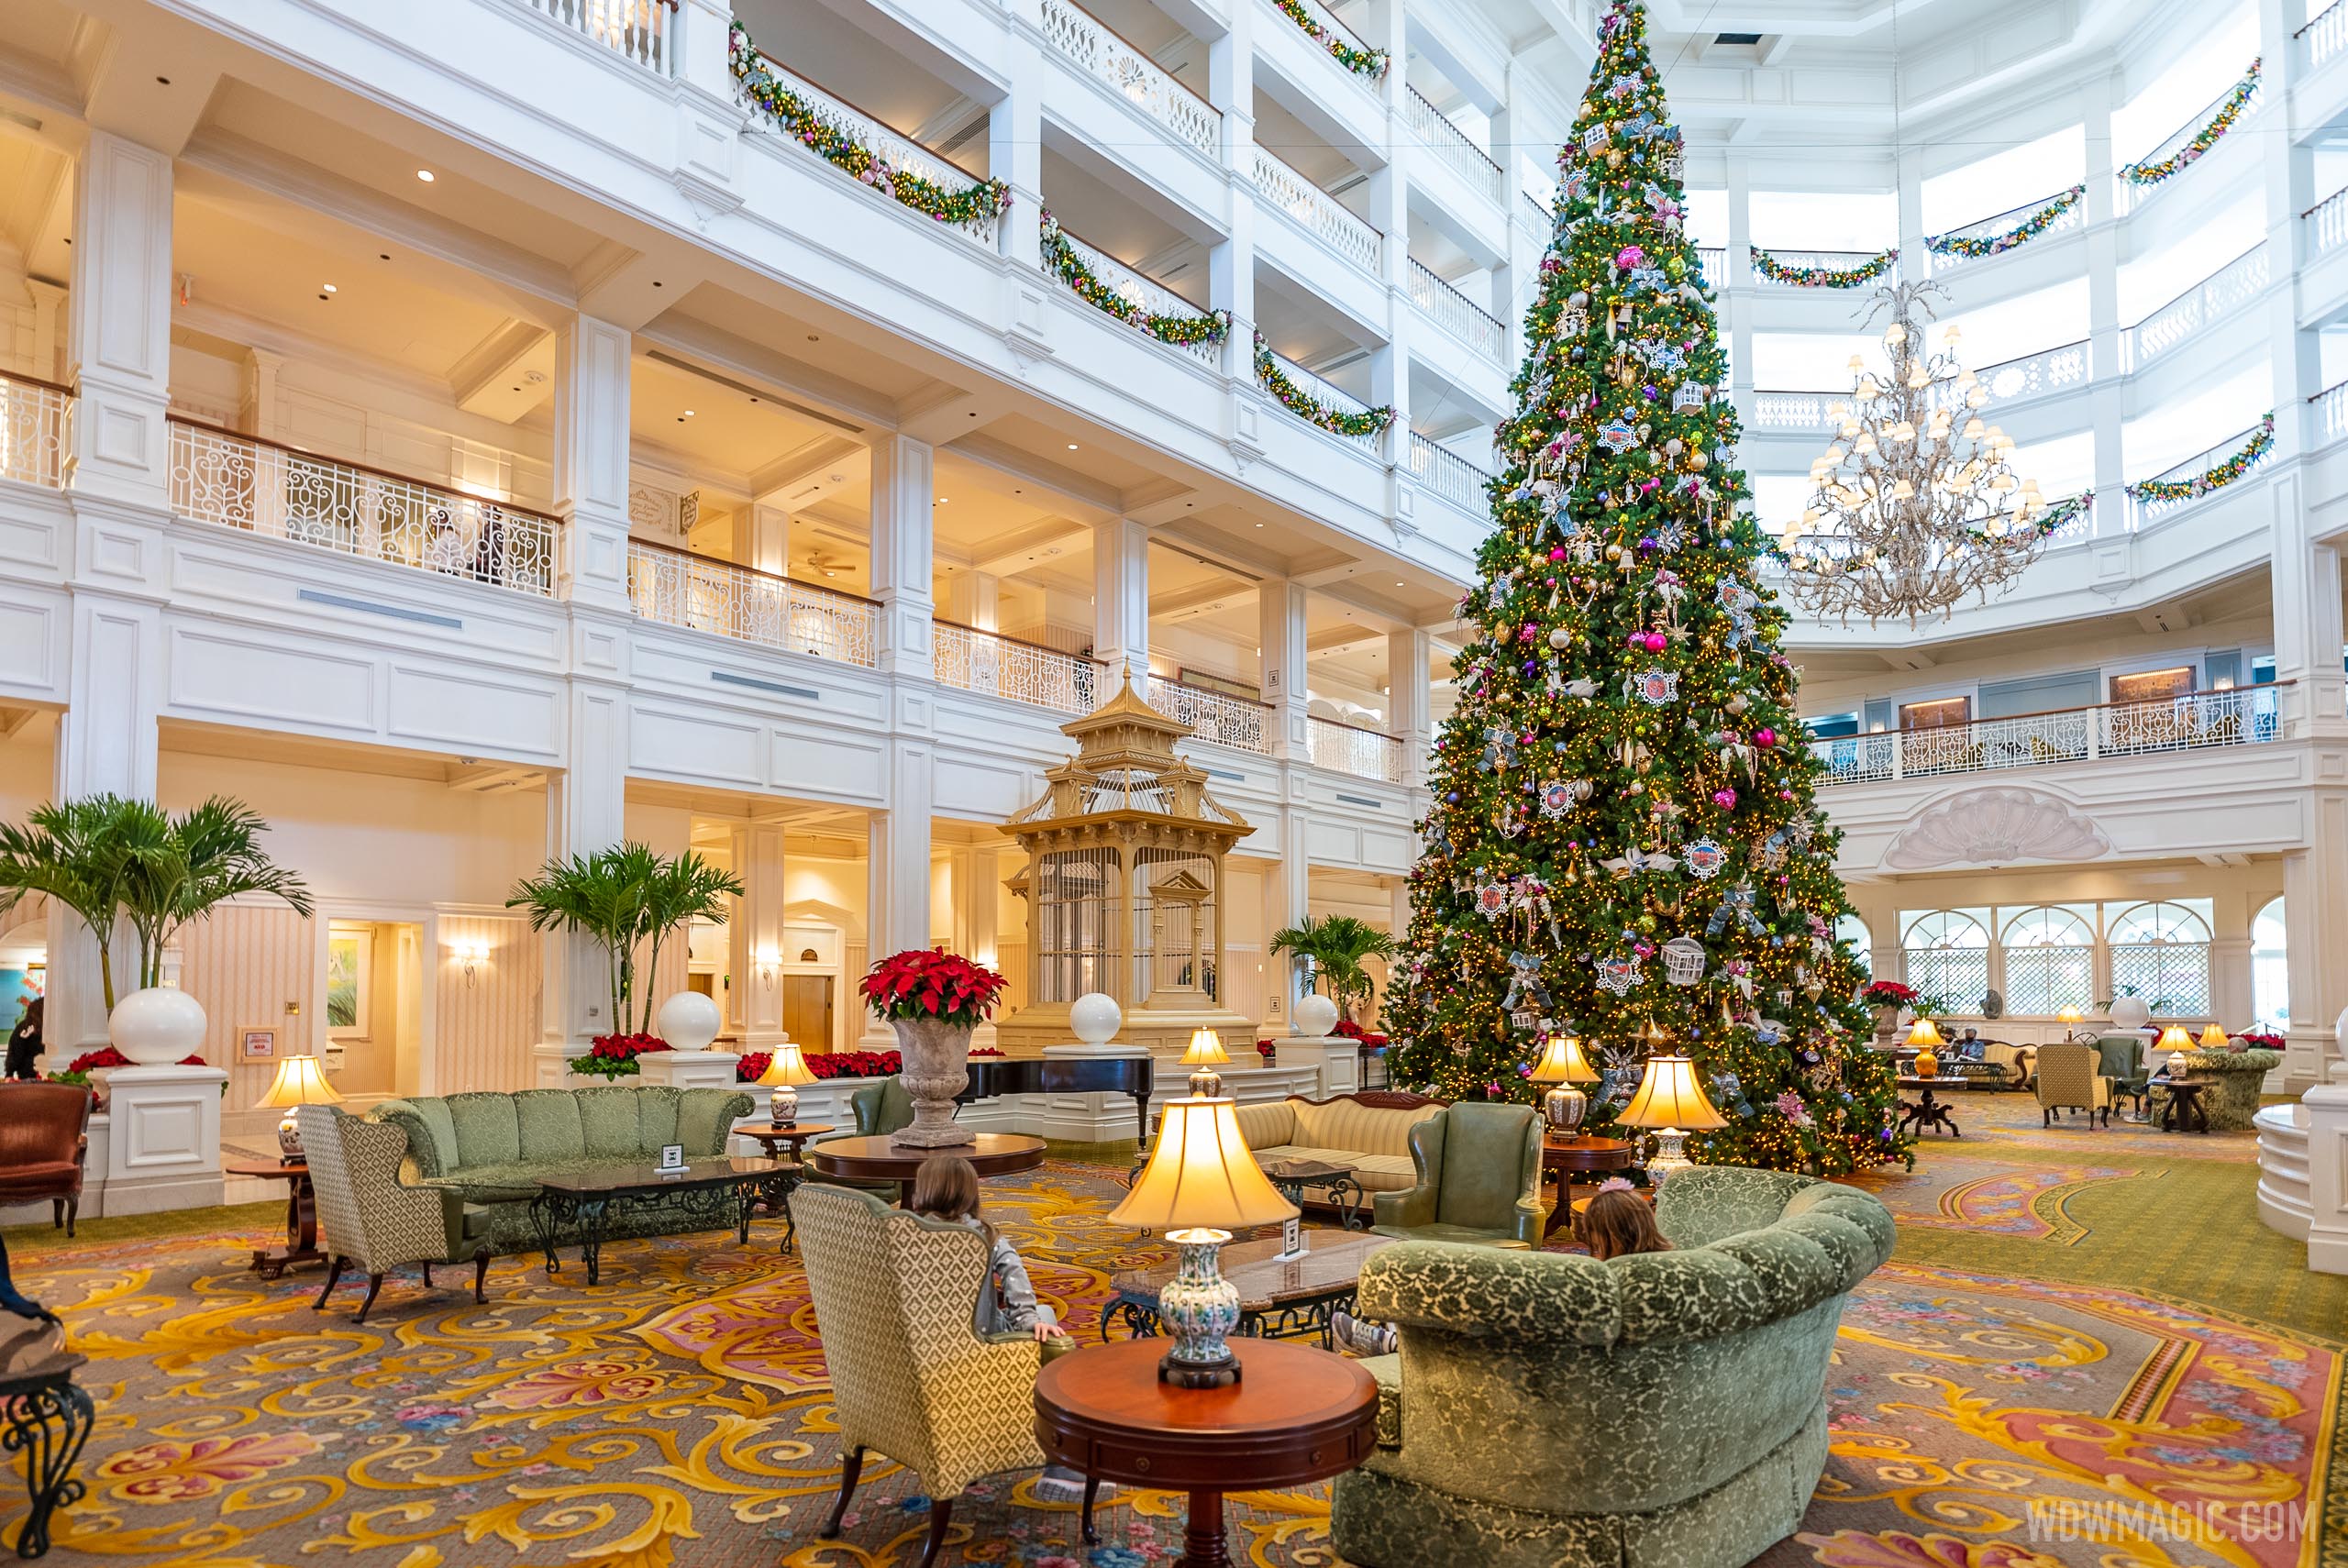 2020 Grand Floridian Resort Christmas decorations Photo 3 of 11